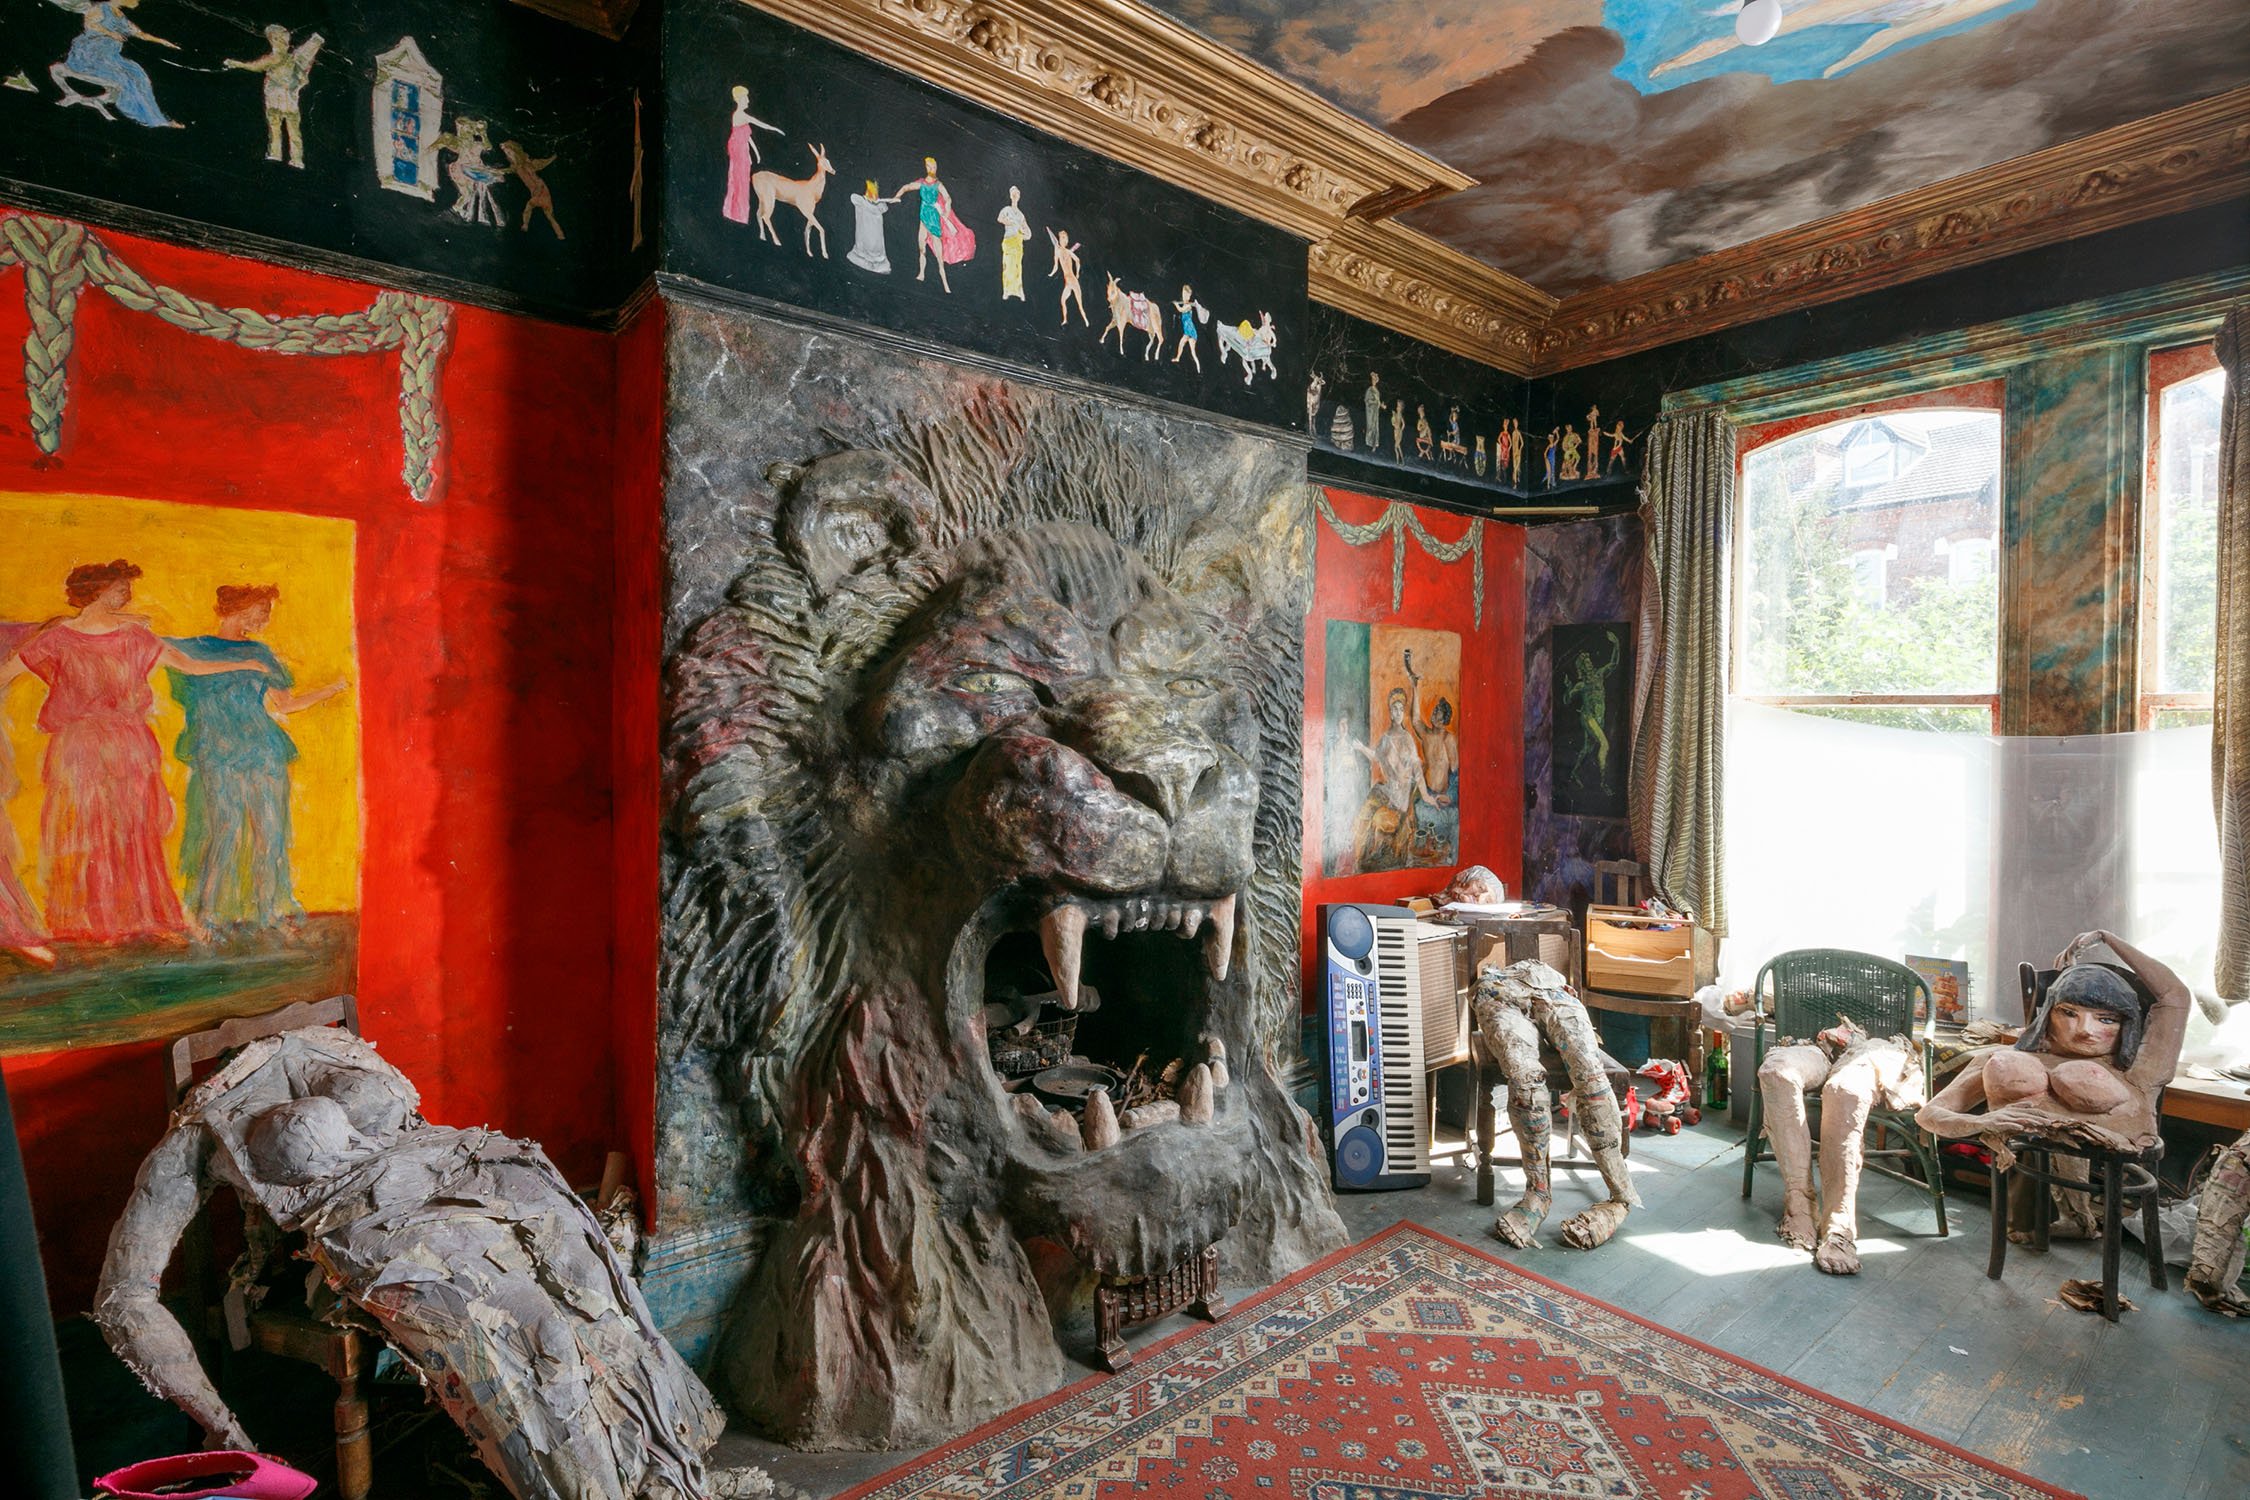 A photograph of a room containing a large lion head sculpture on the wall, a painted mural ceiling and partial models of people placed on chairs